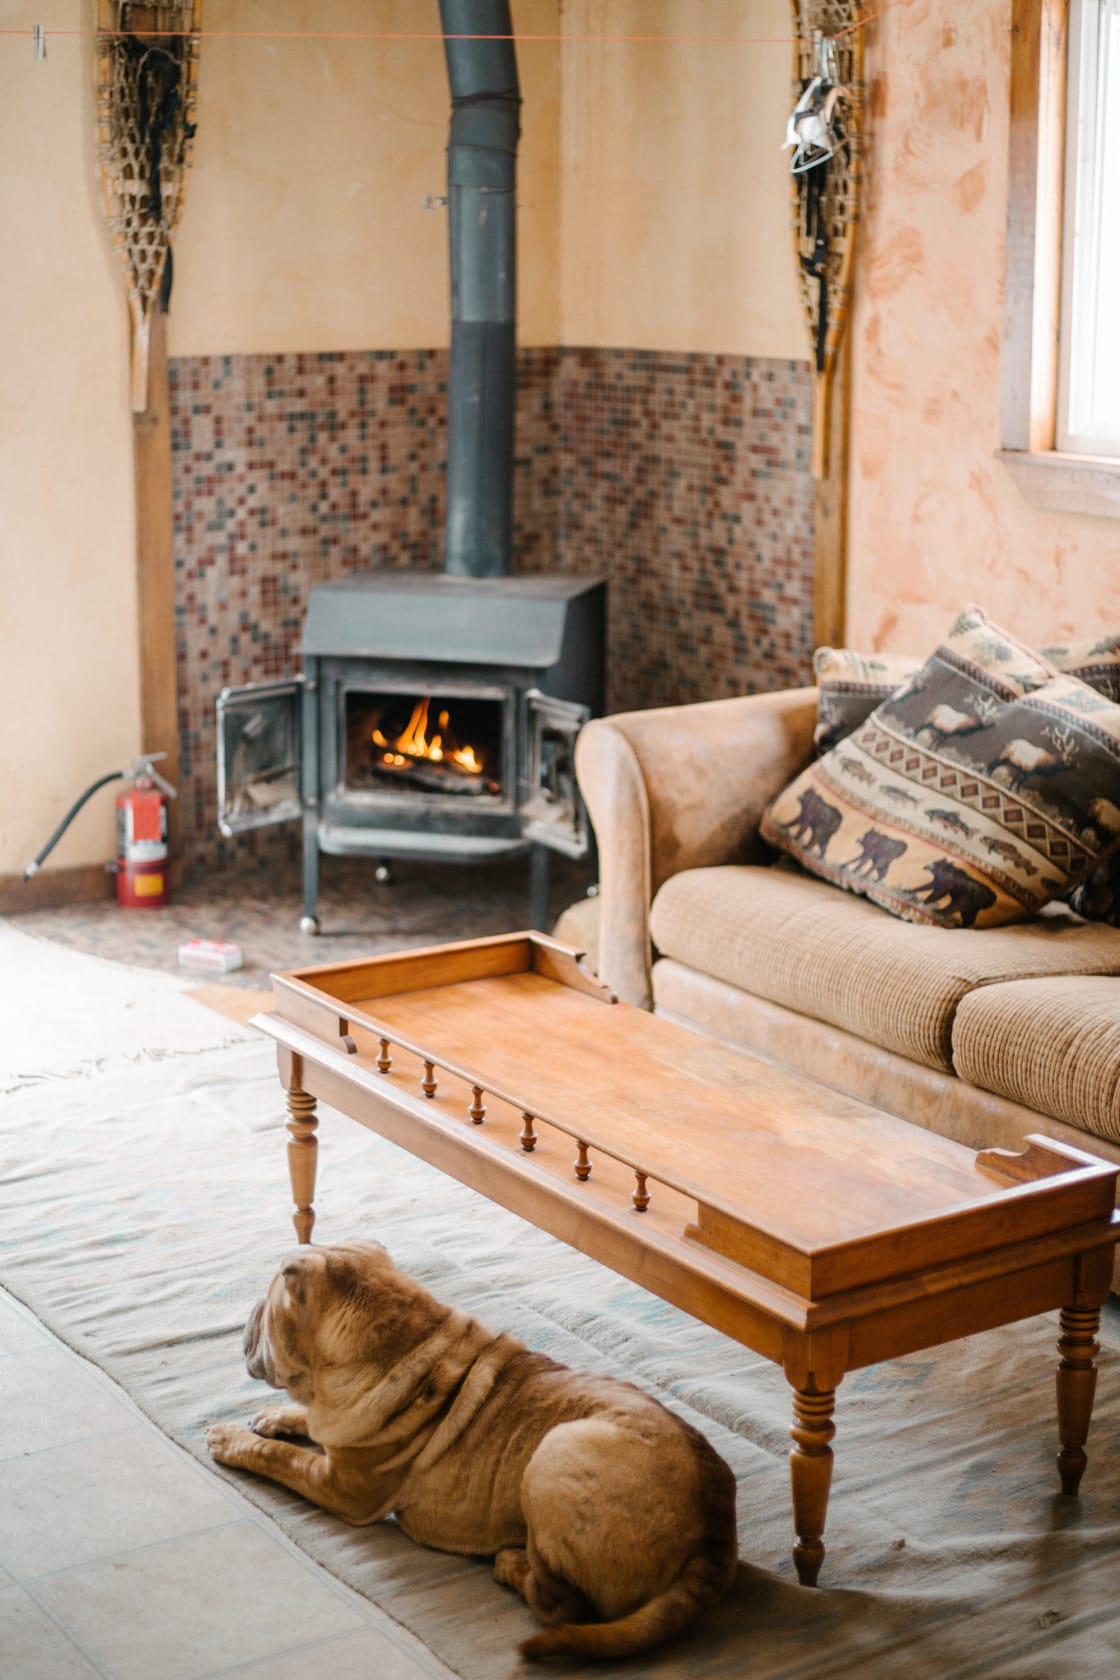 The cabin is pet friendly and comes stocked with firewood to keep you and your furry friends warm and cozy!